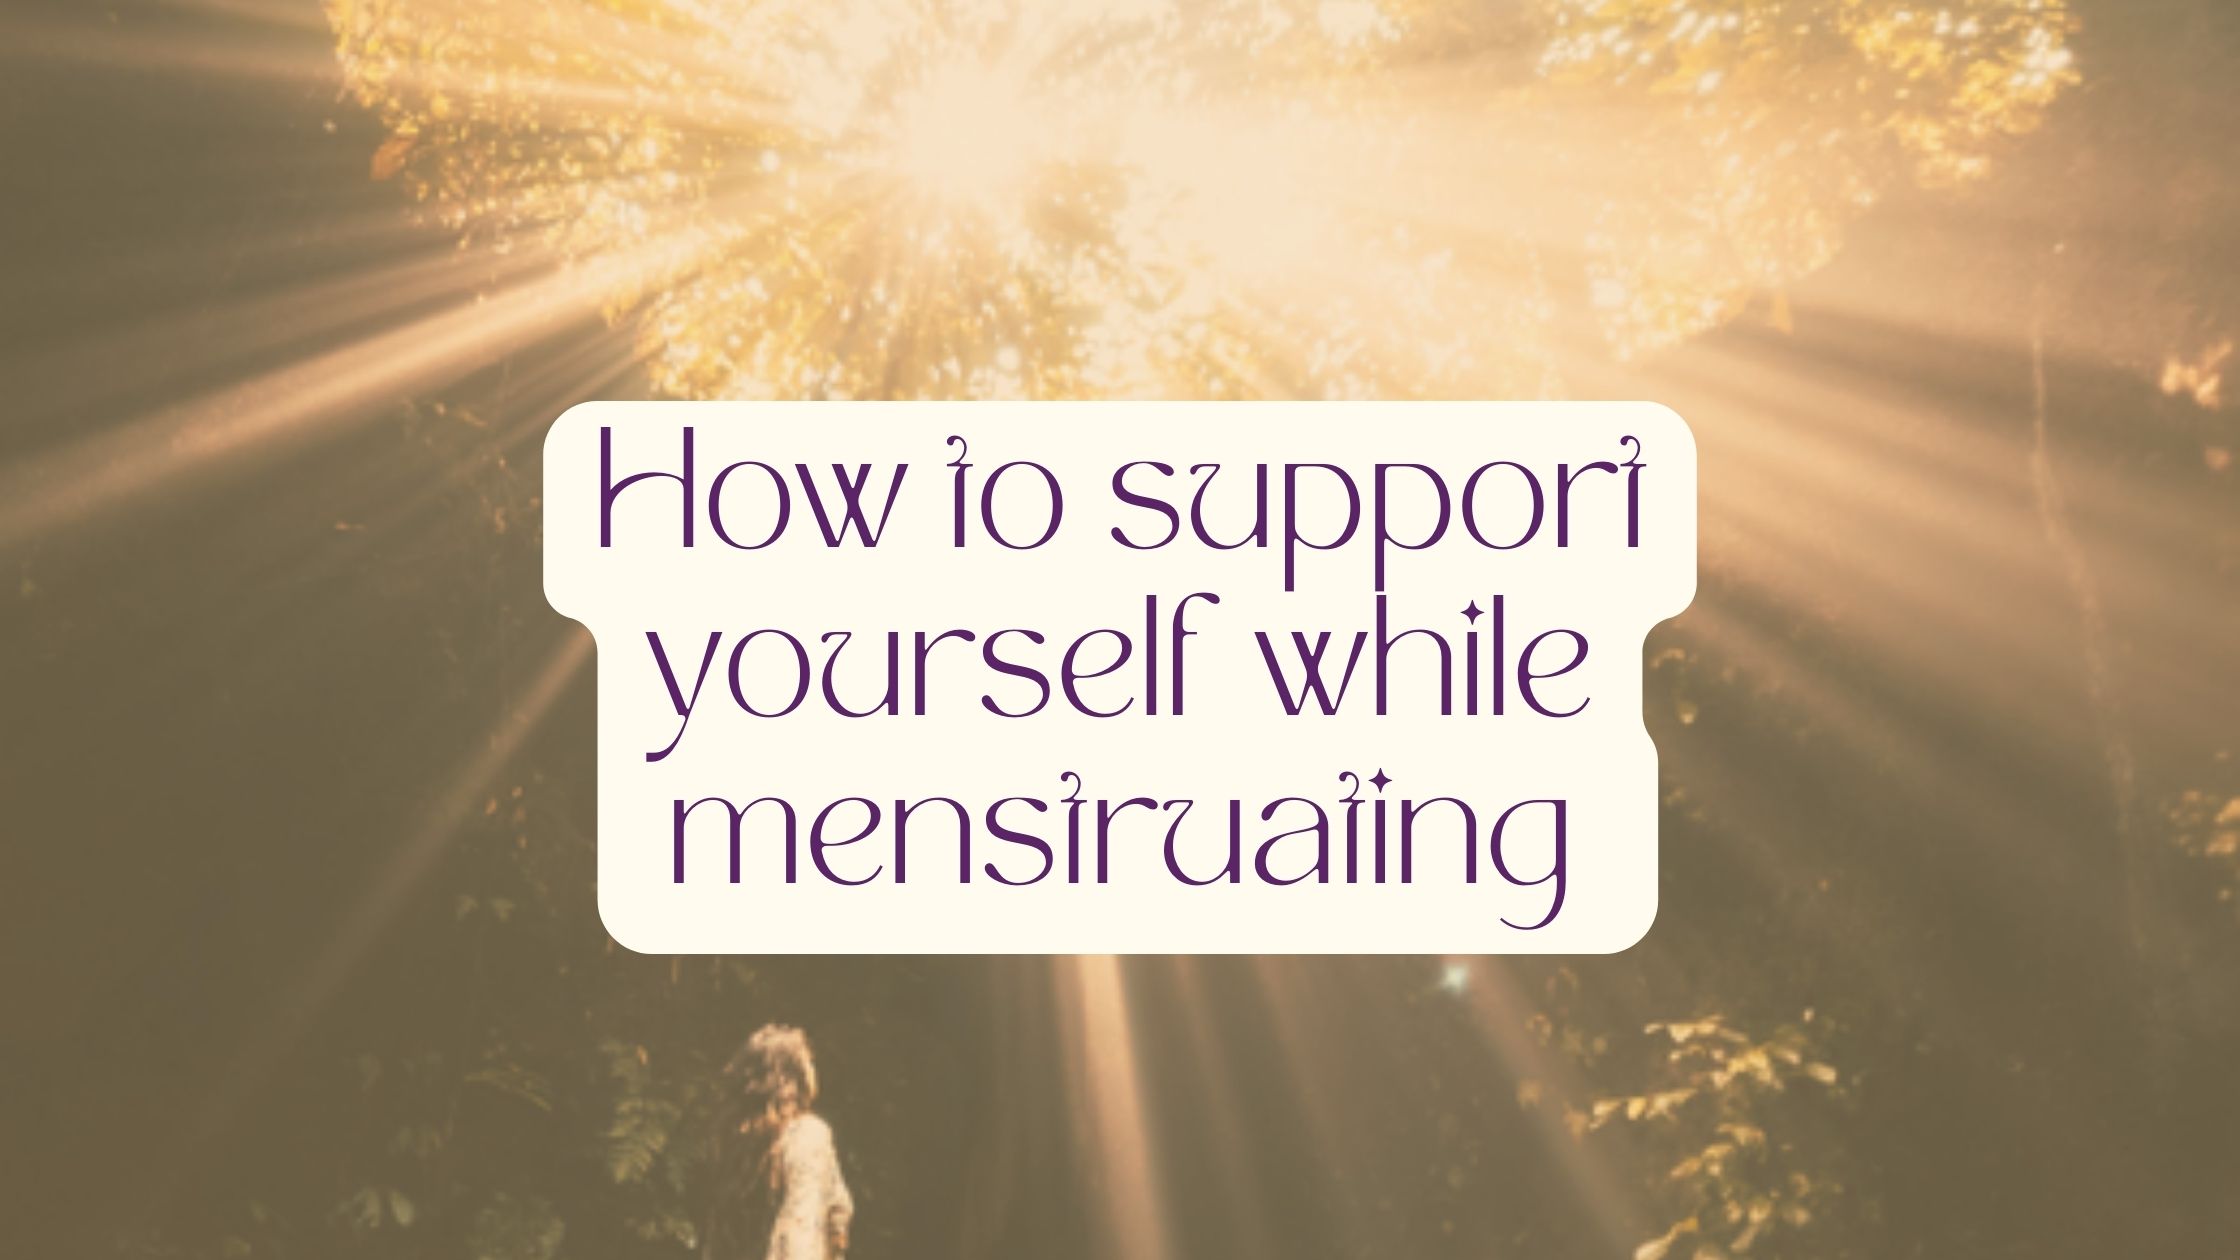 Support yourself while menstruating